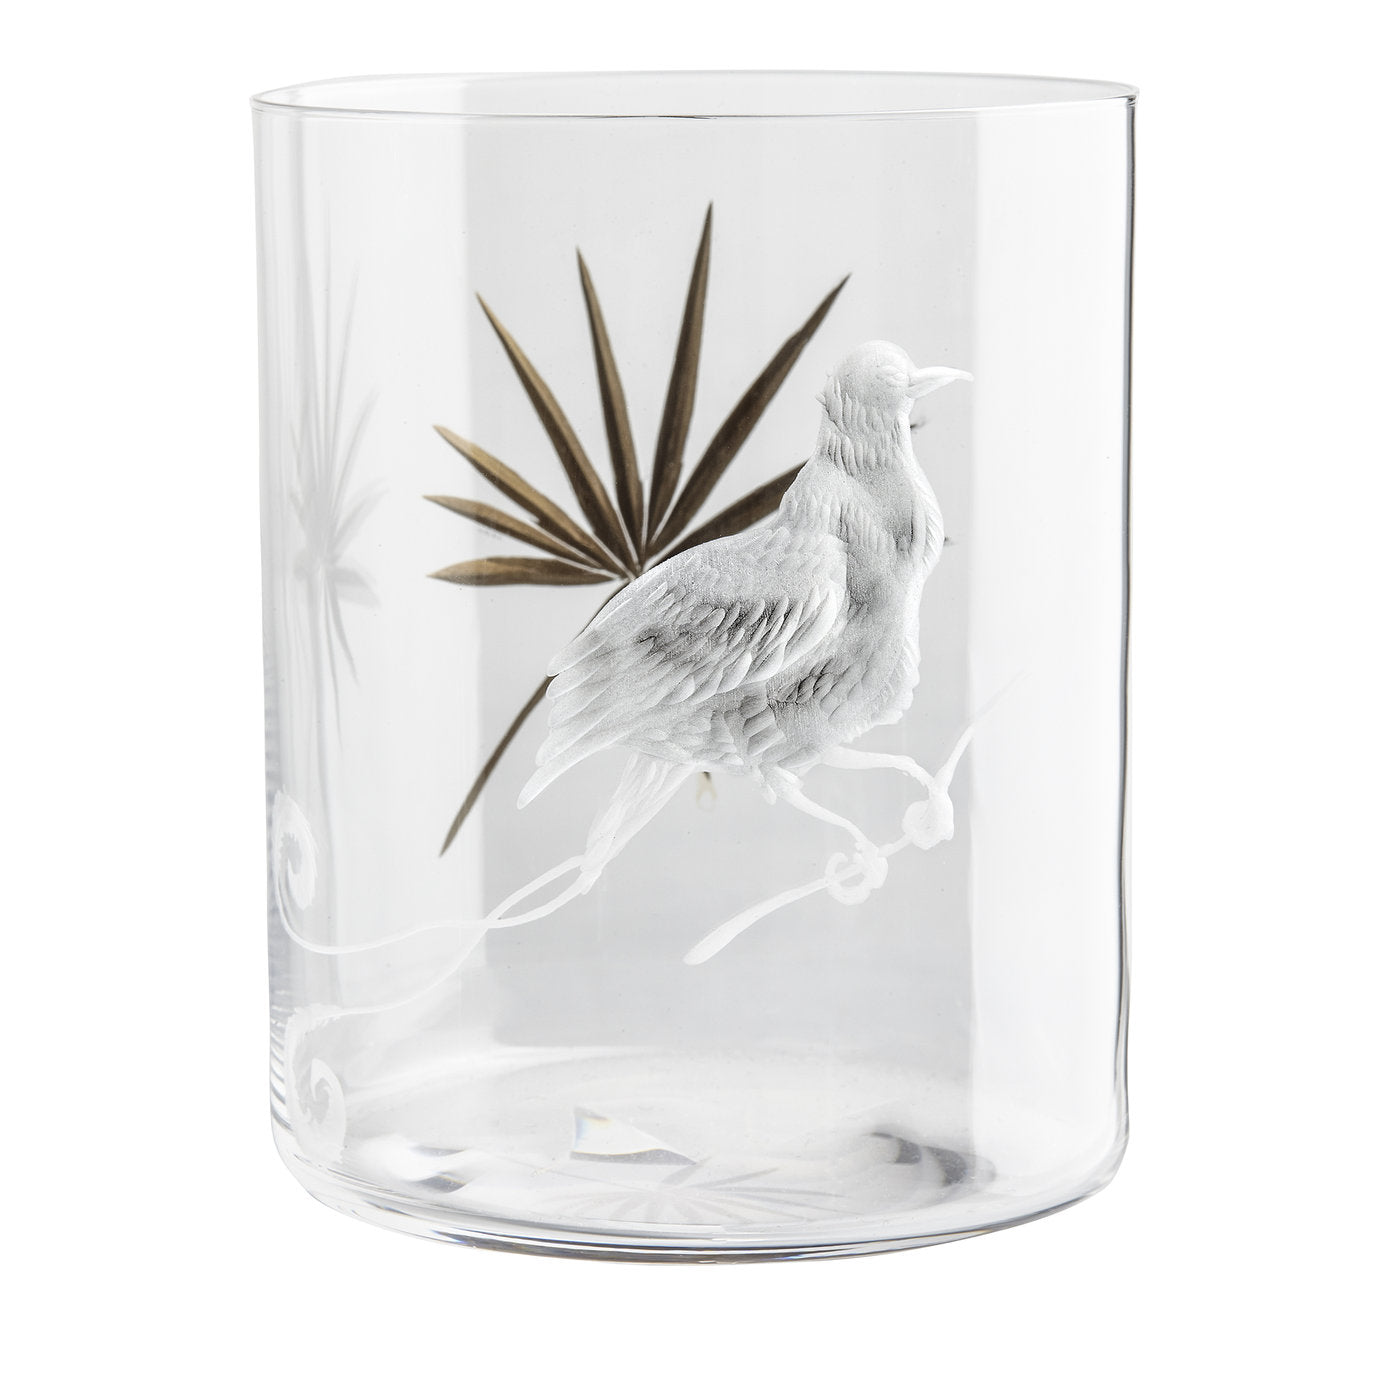 Set of 6 Birds of paradise Crystal Glasses - Alternative view 3